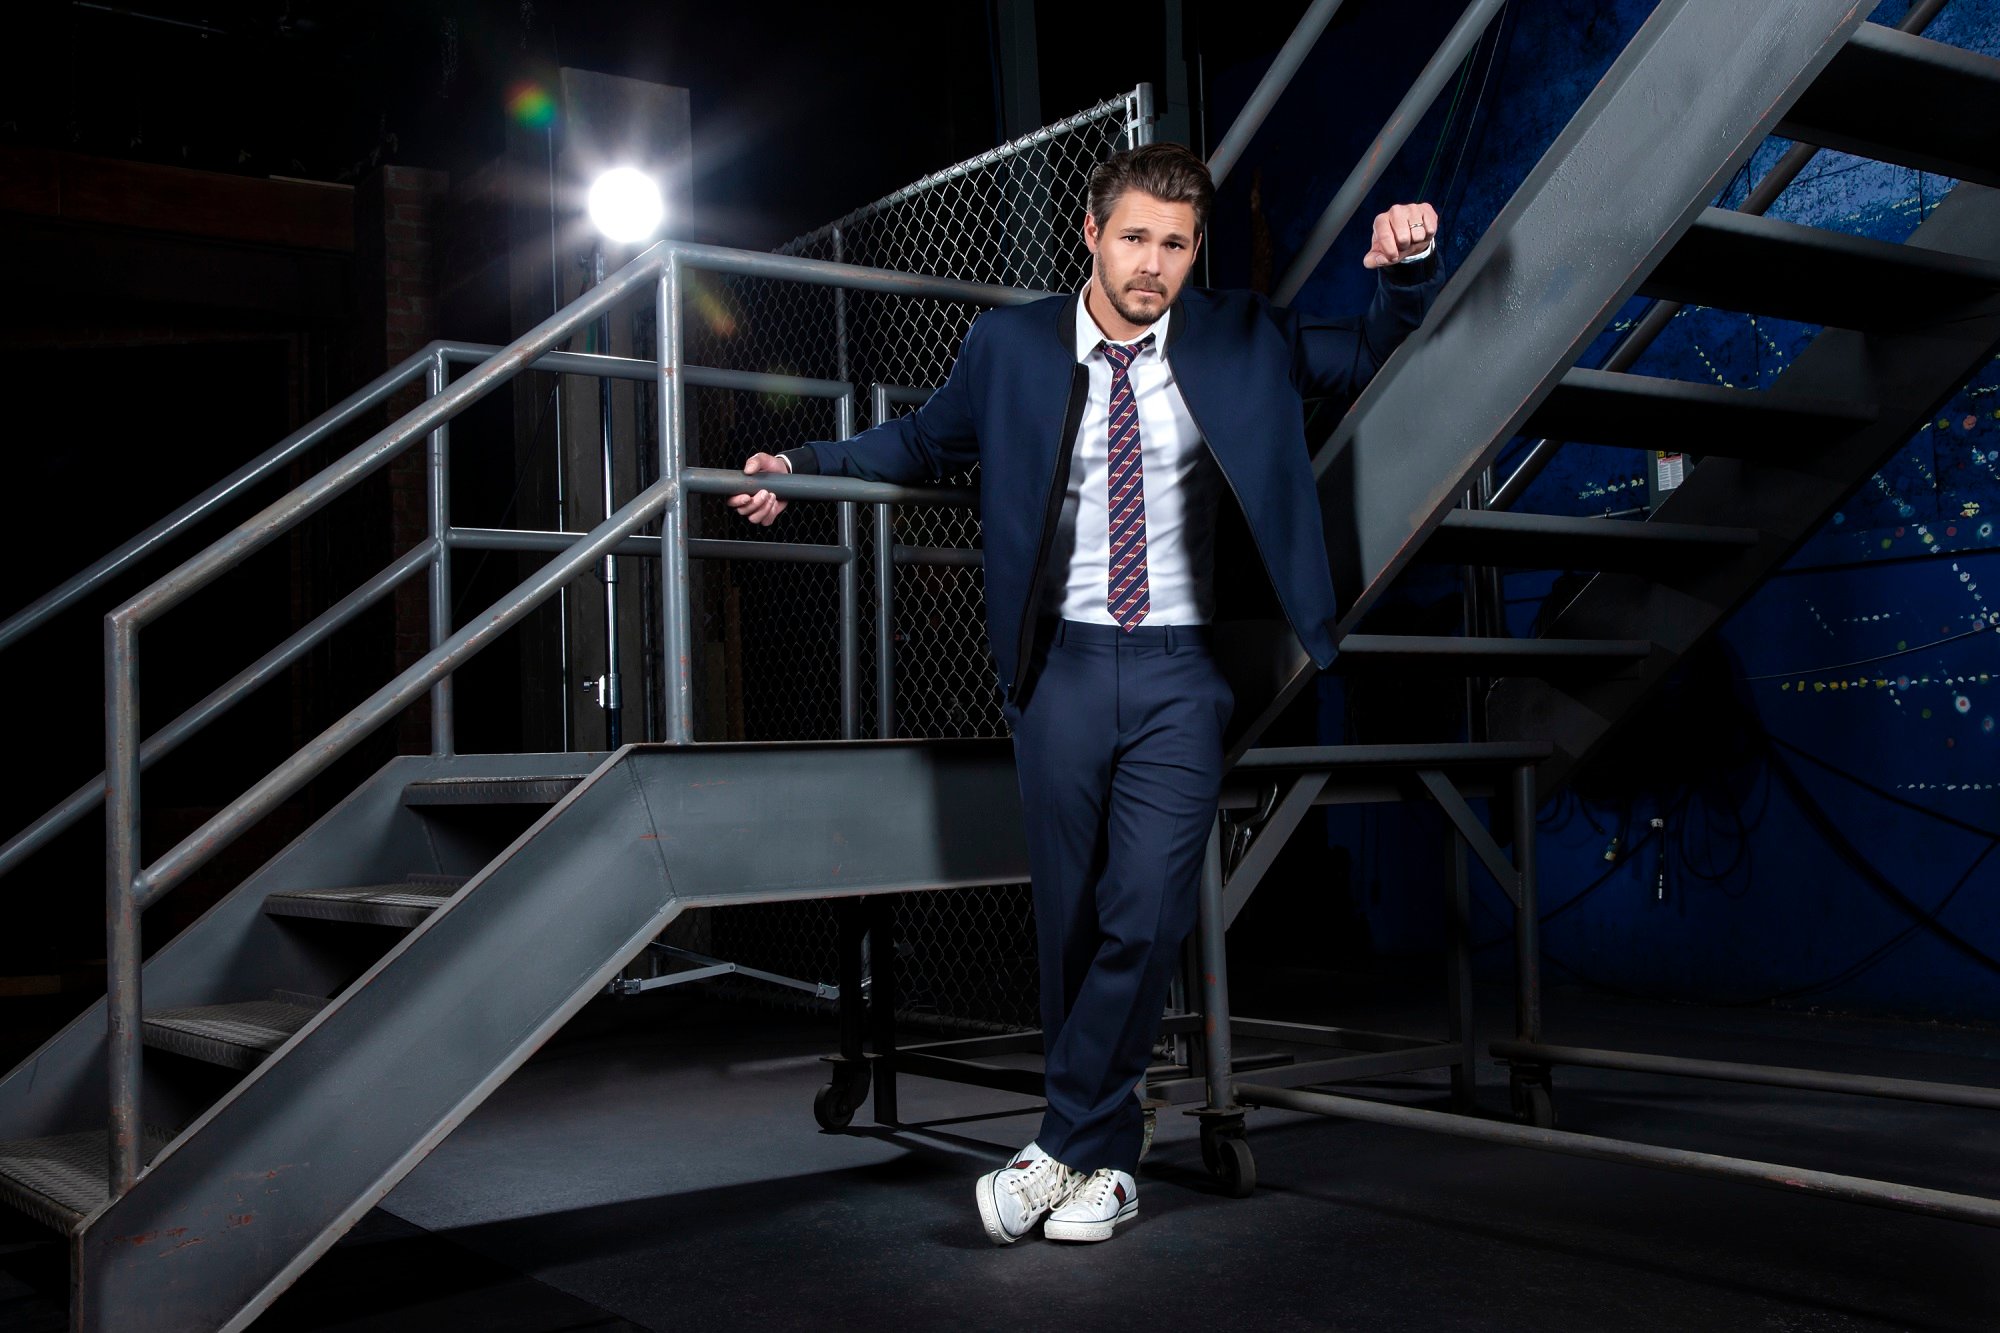 The Bold and the Beautiful spoilers focus on Liam Spencer, played by Scott Clifton, pictured here in a publicity photo wearing a blue tuxedo and white sneakers